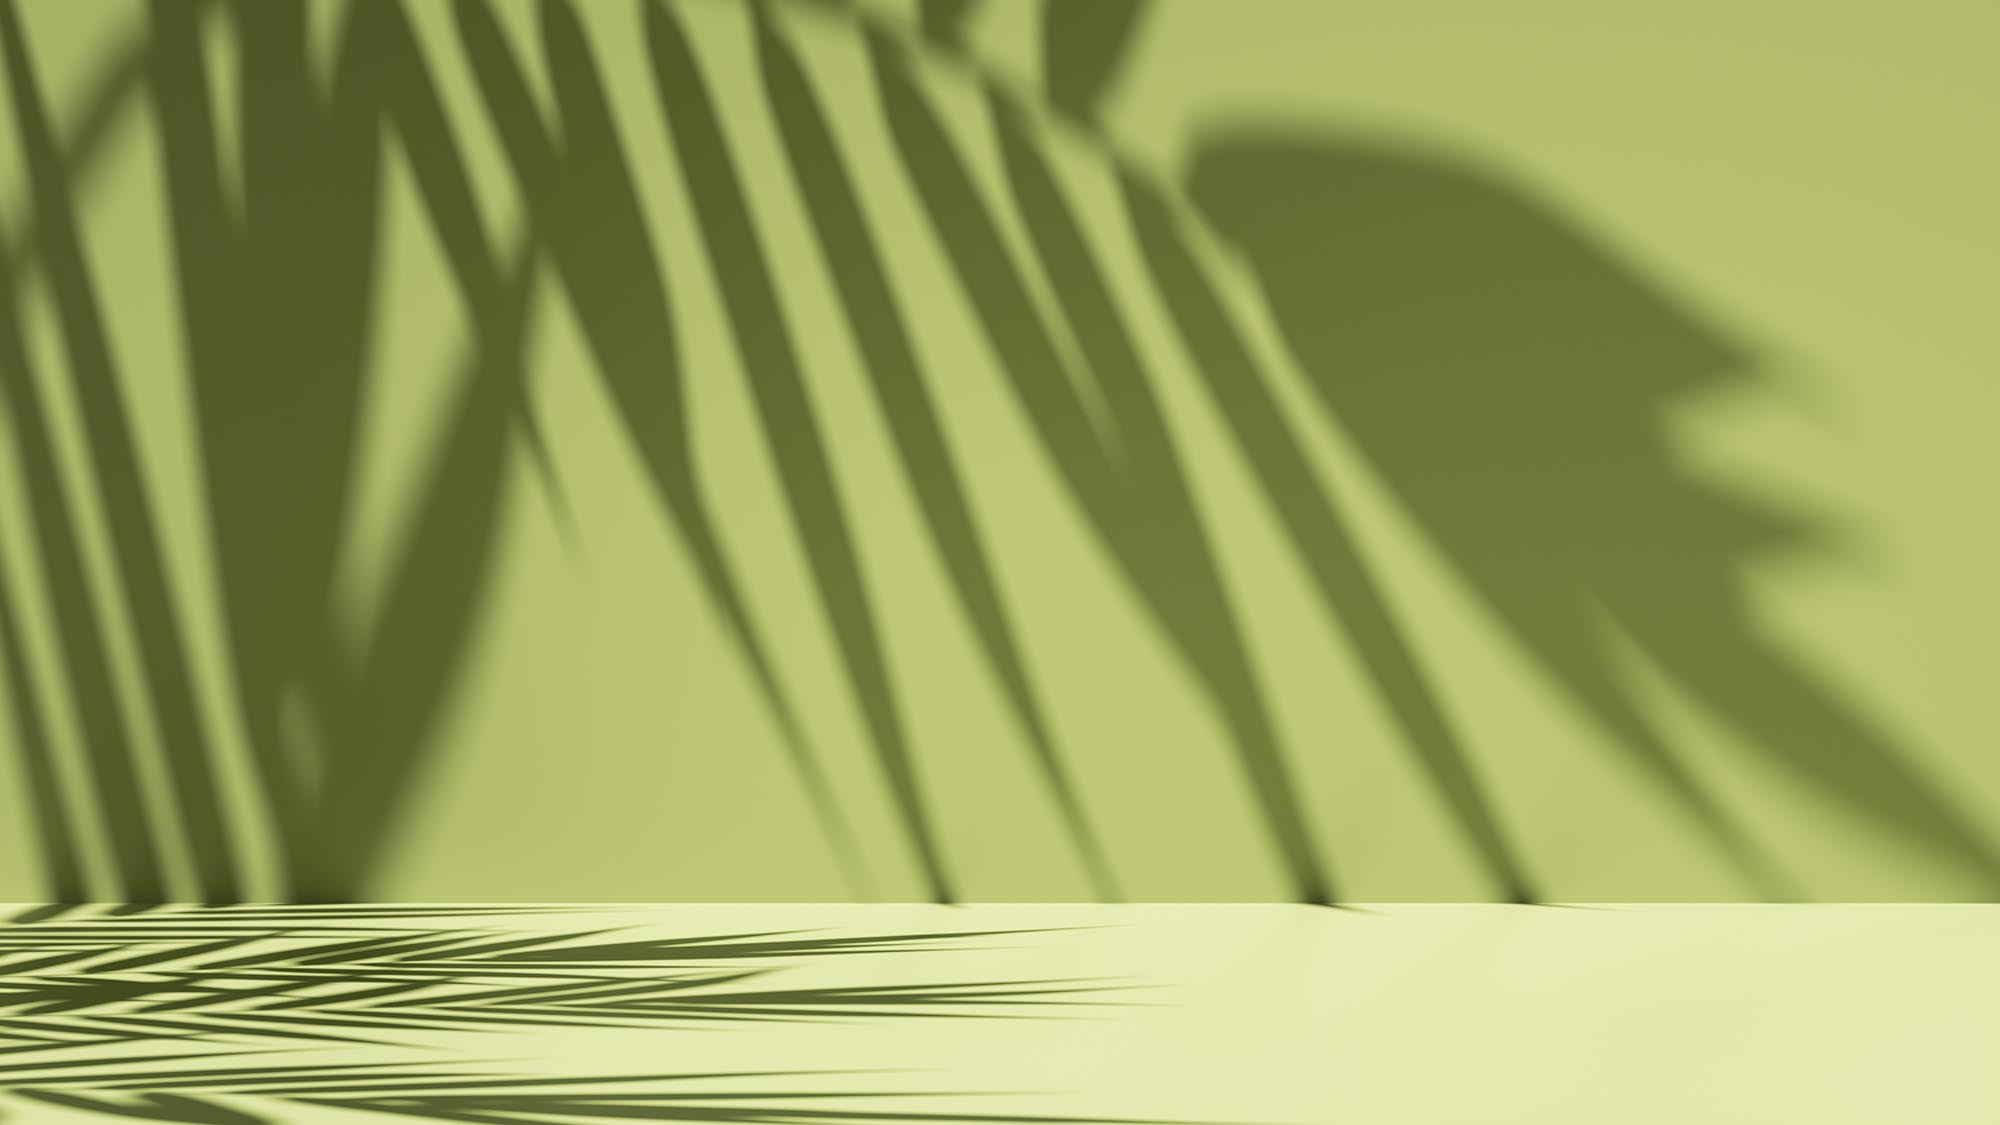 simple abstract green background illuminated with bright sunlight, with palm leaf shadow